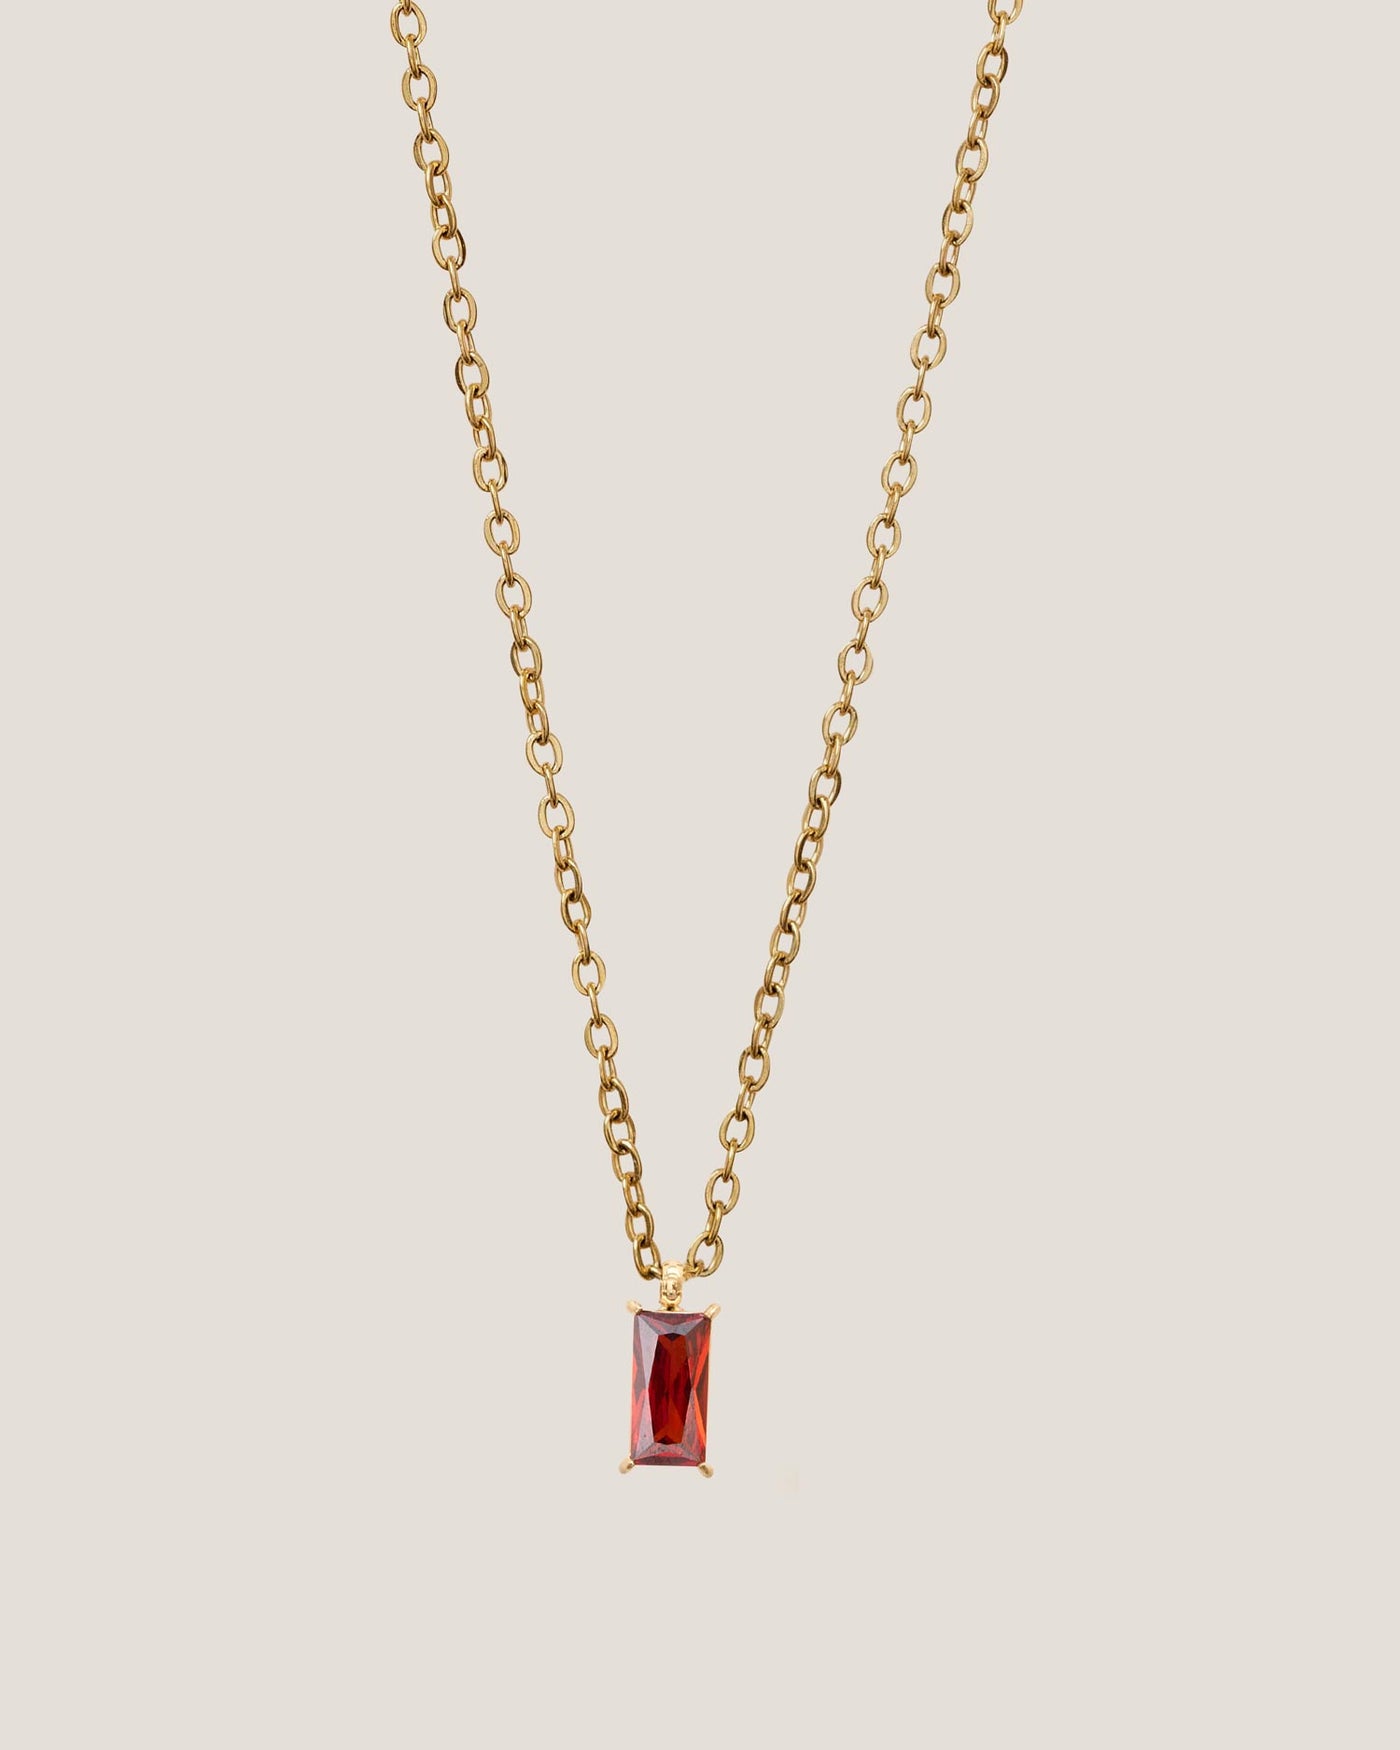 Coco My Chanel x Gung Verity Ruby Pendant Gold Necklace